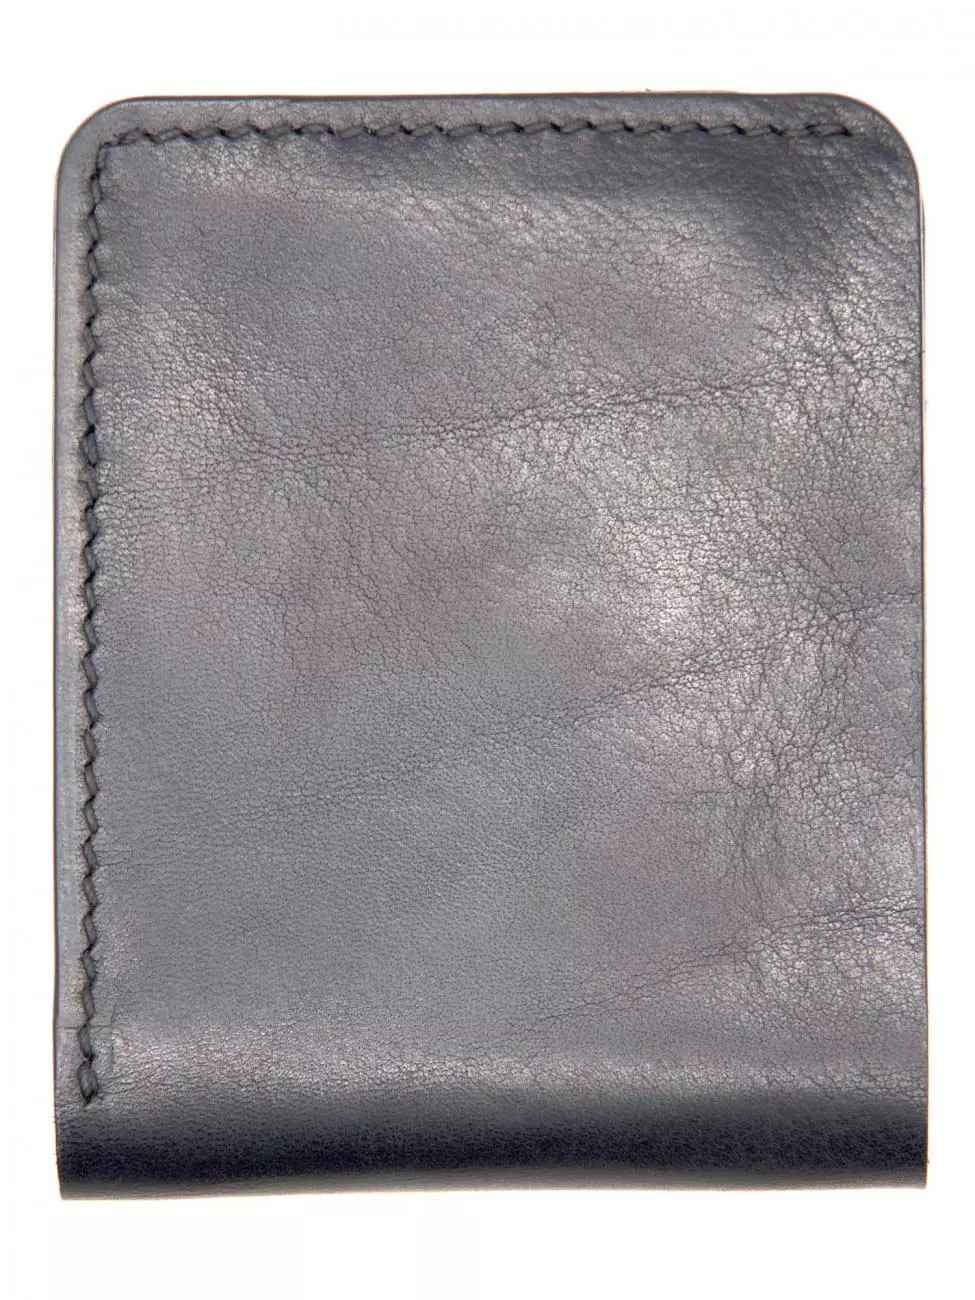 5 - Small leather wallet